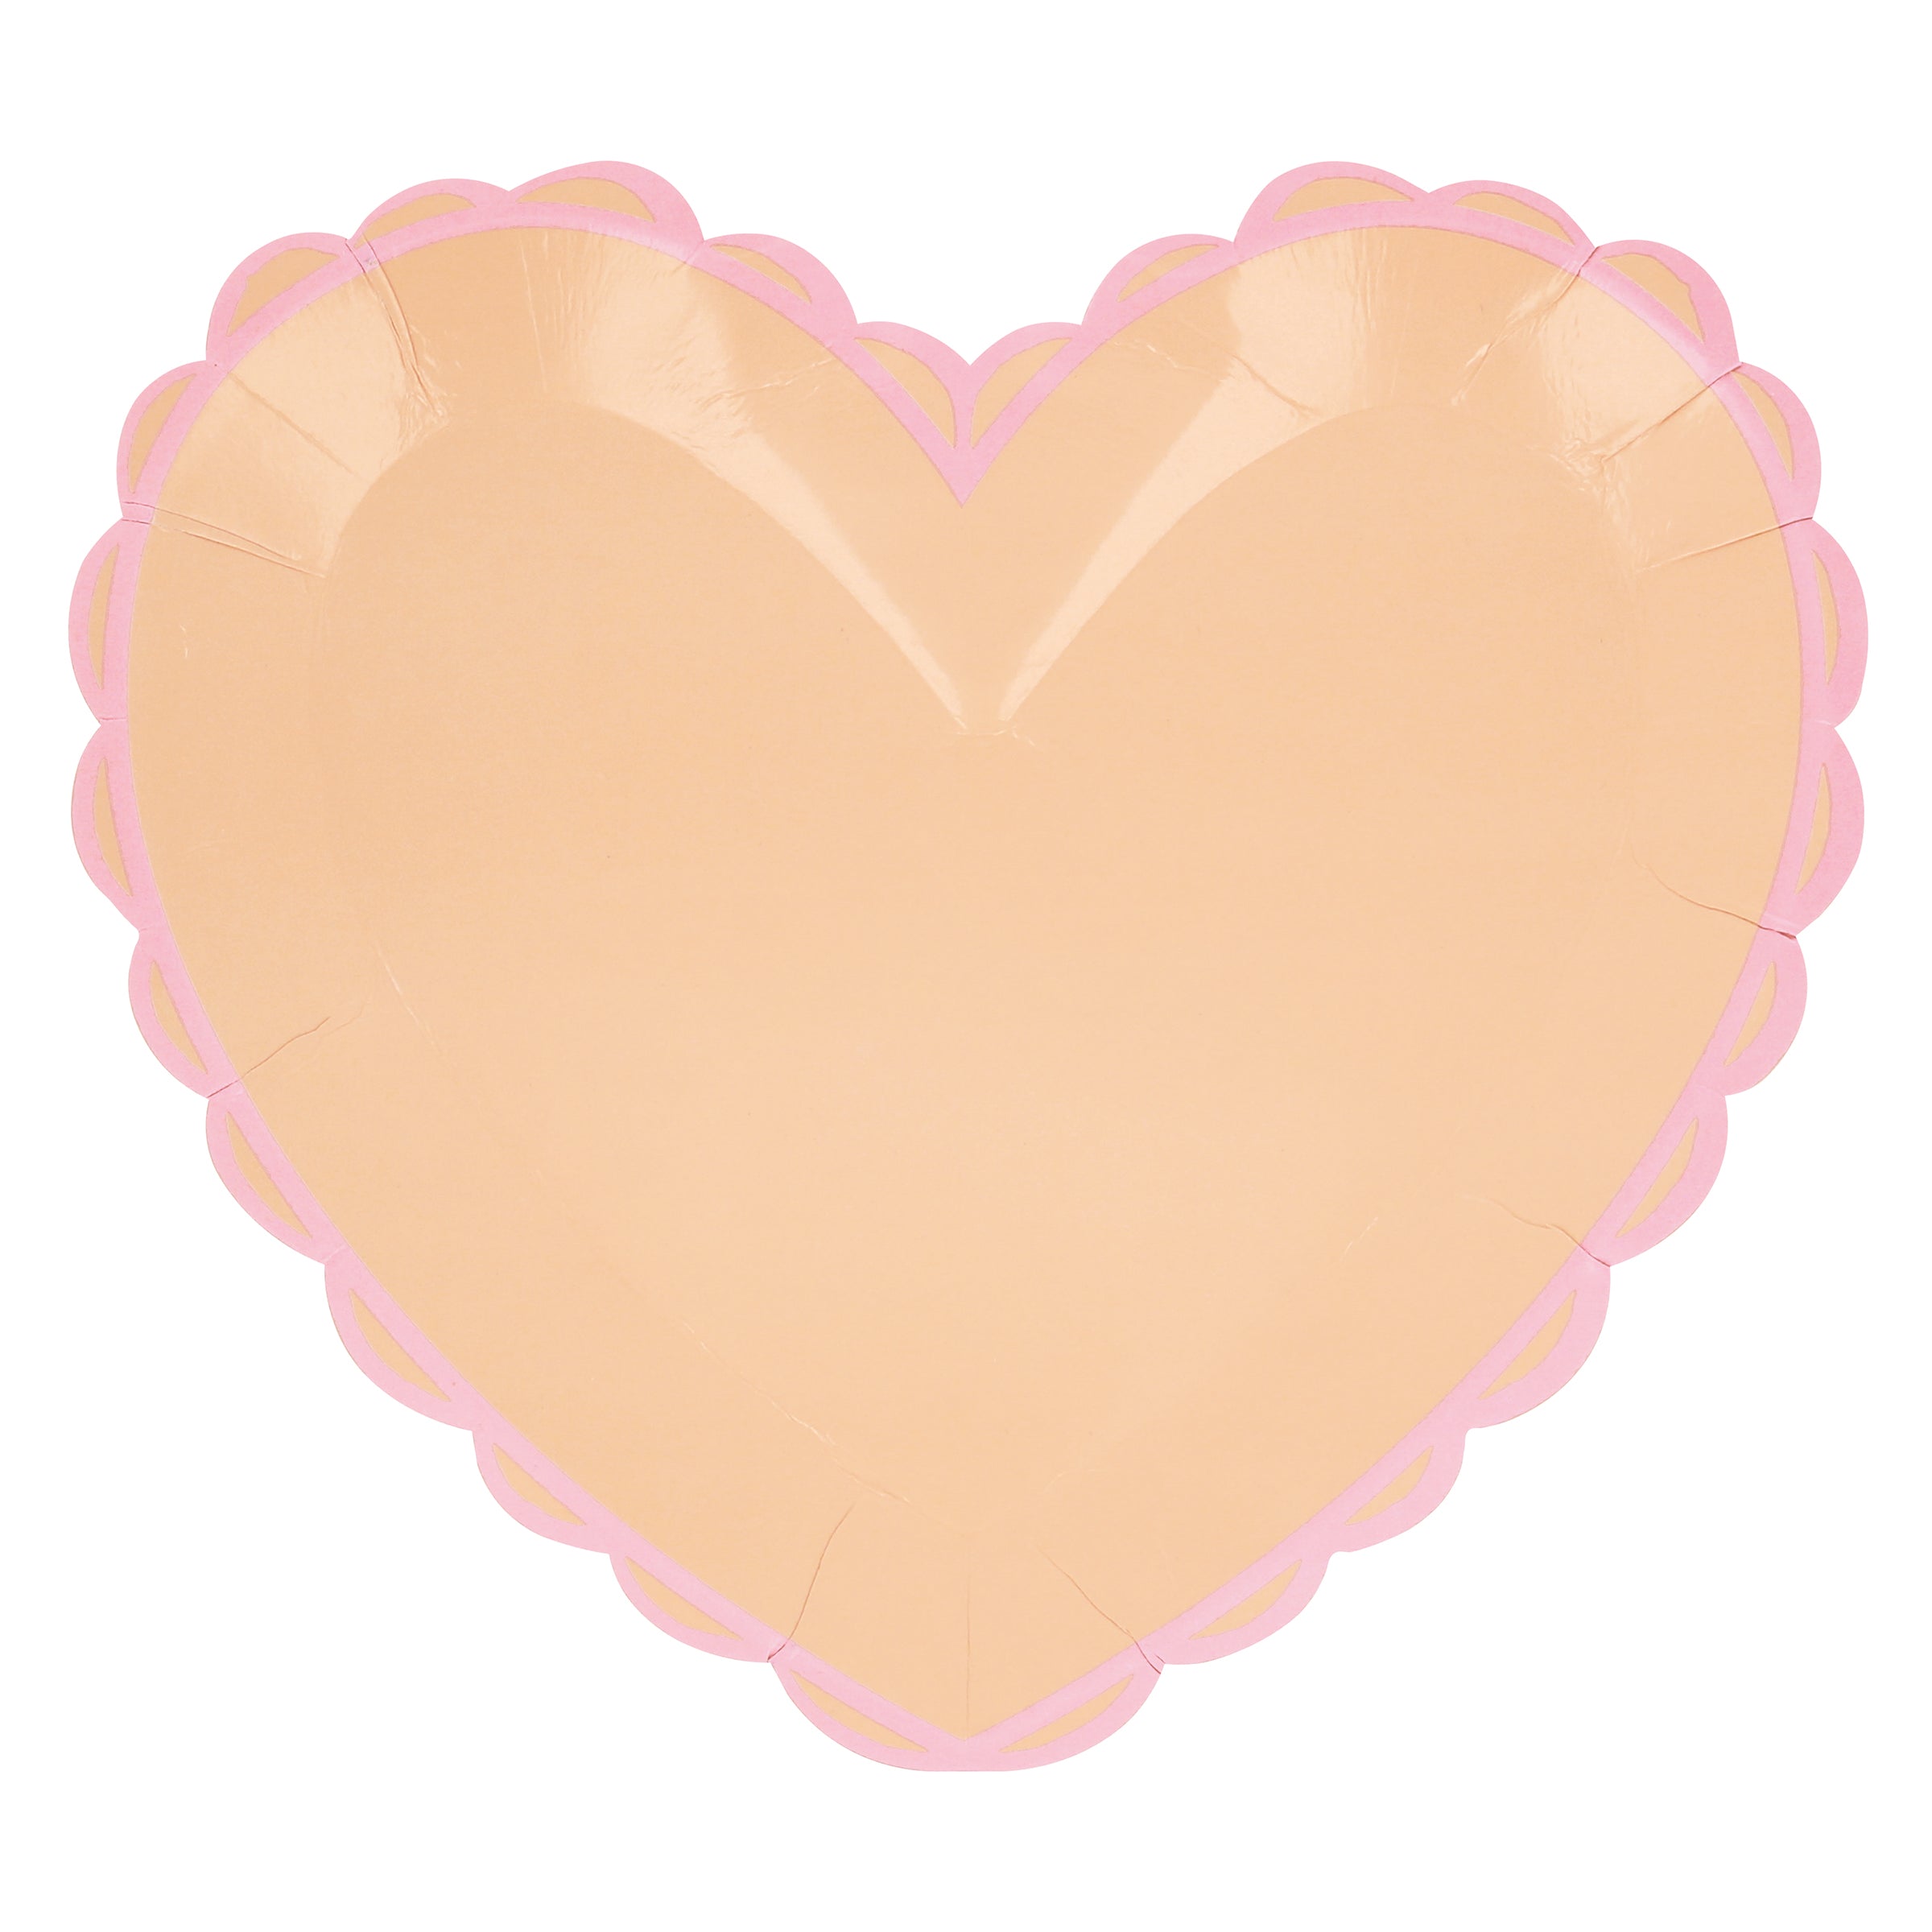 Our dinner plates, in heart shapes, feature a range of pretty pastel colors and a scalloped border.